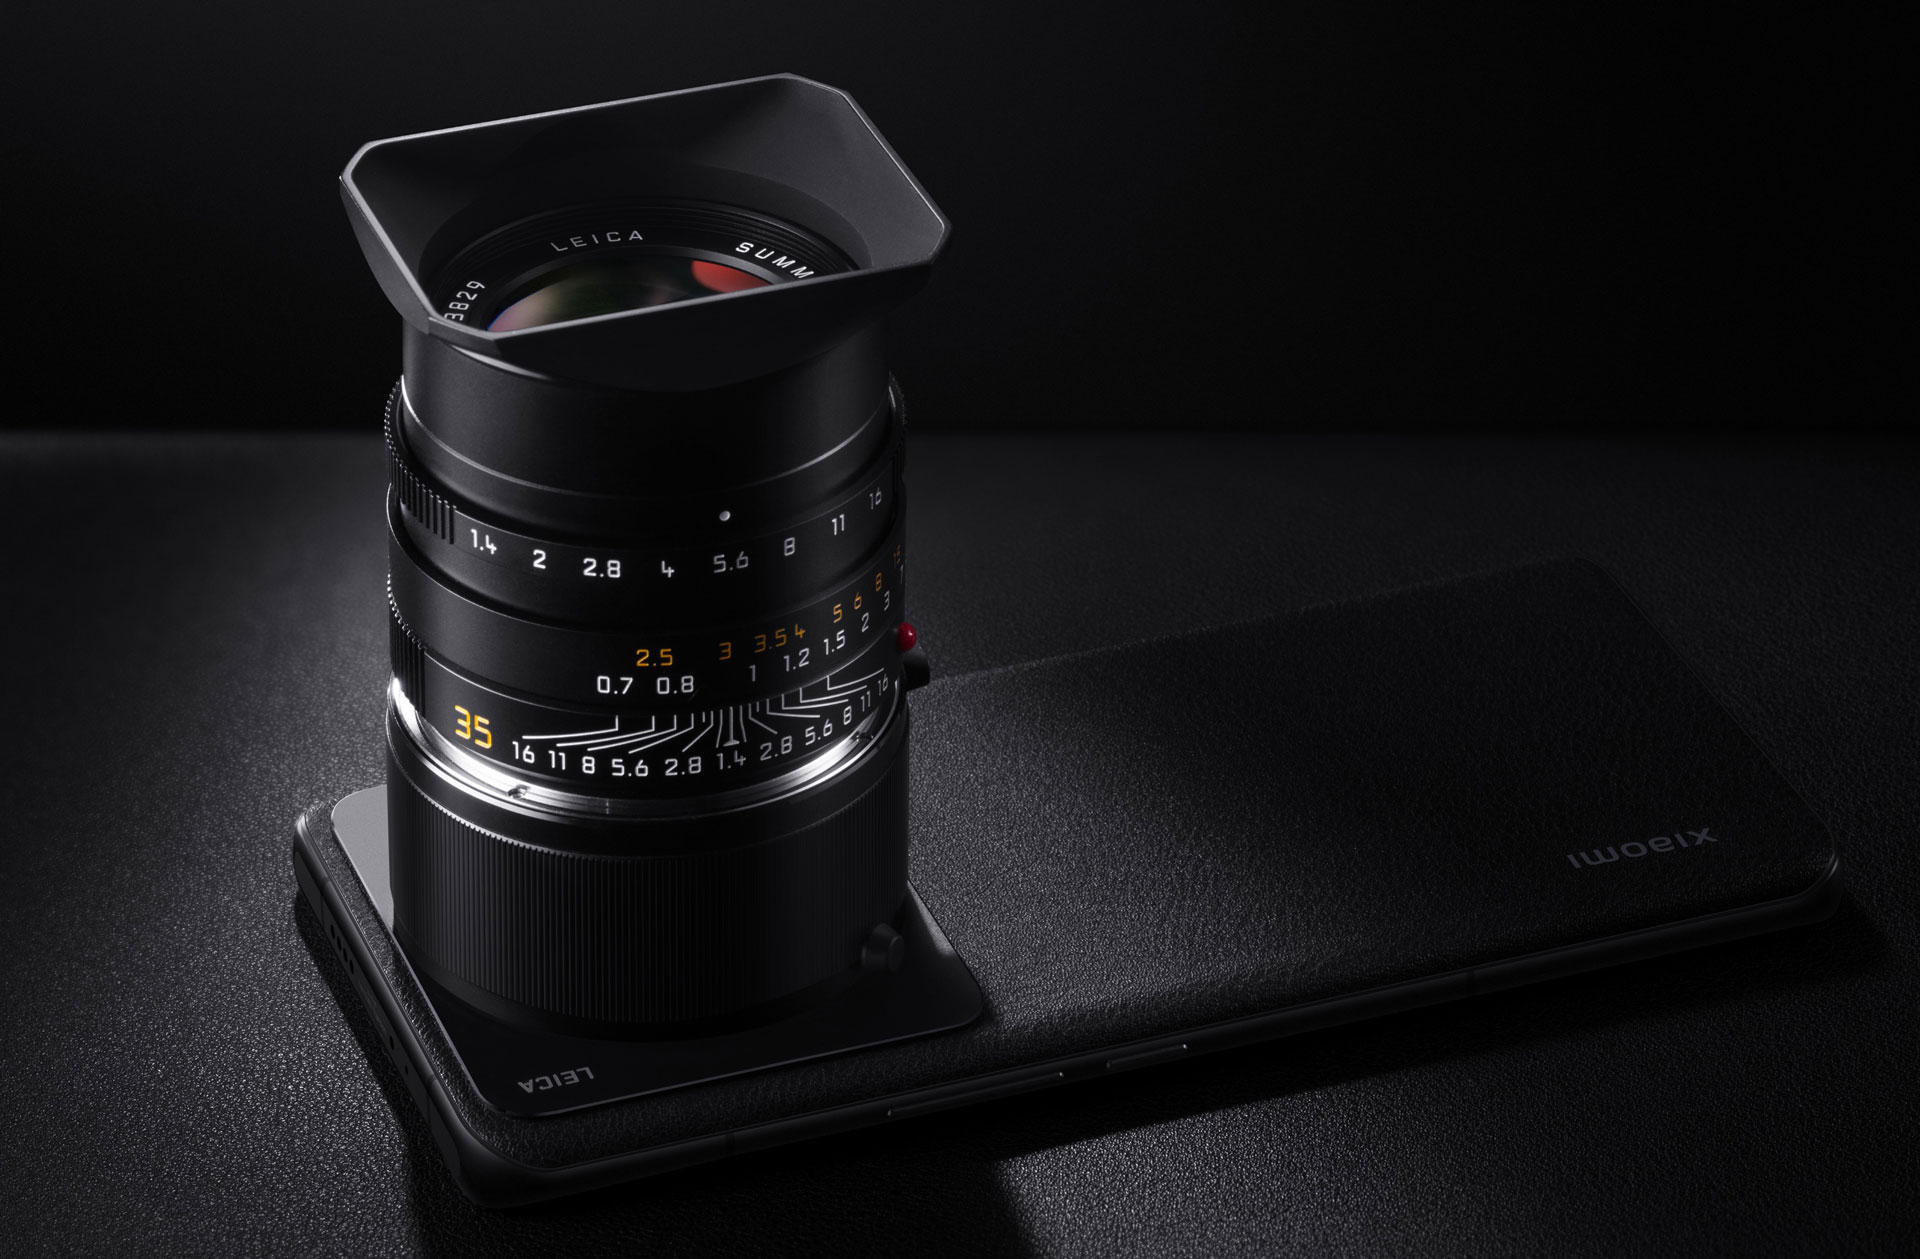 Xiaomi's 12S Ultra Concept Phone Supports Leica Camera Lens Attachments